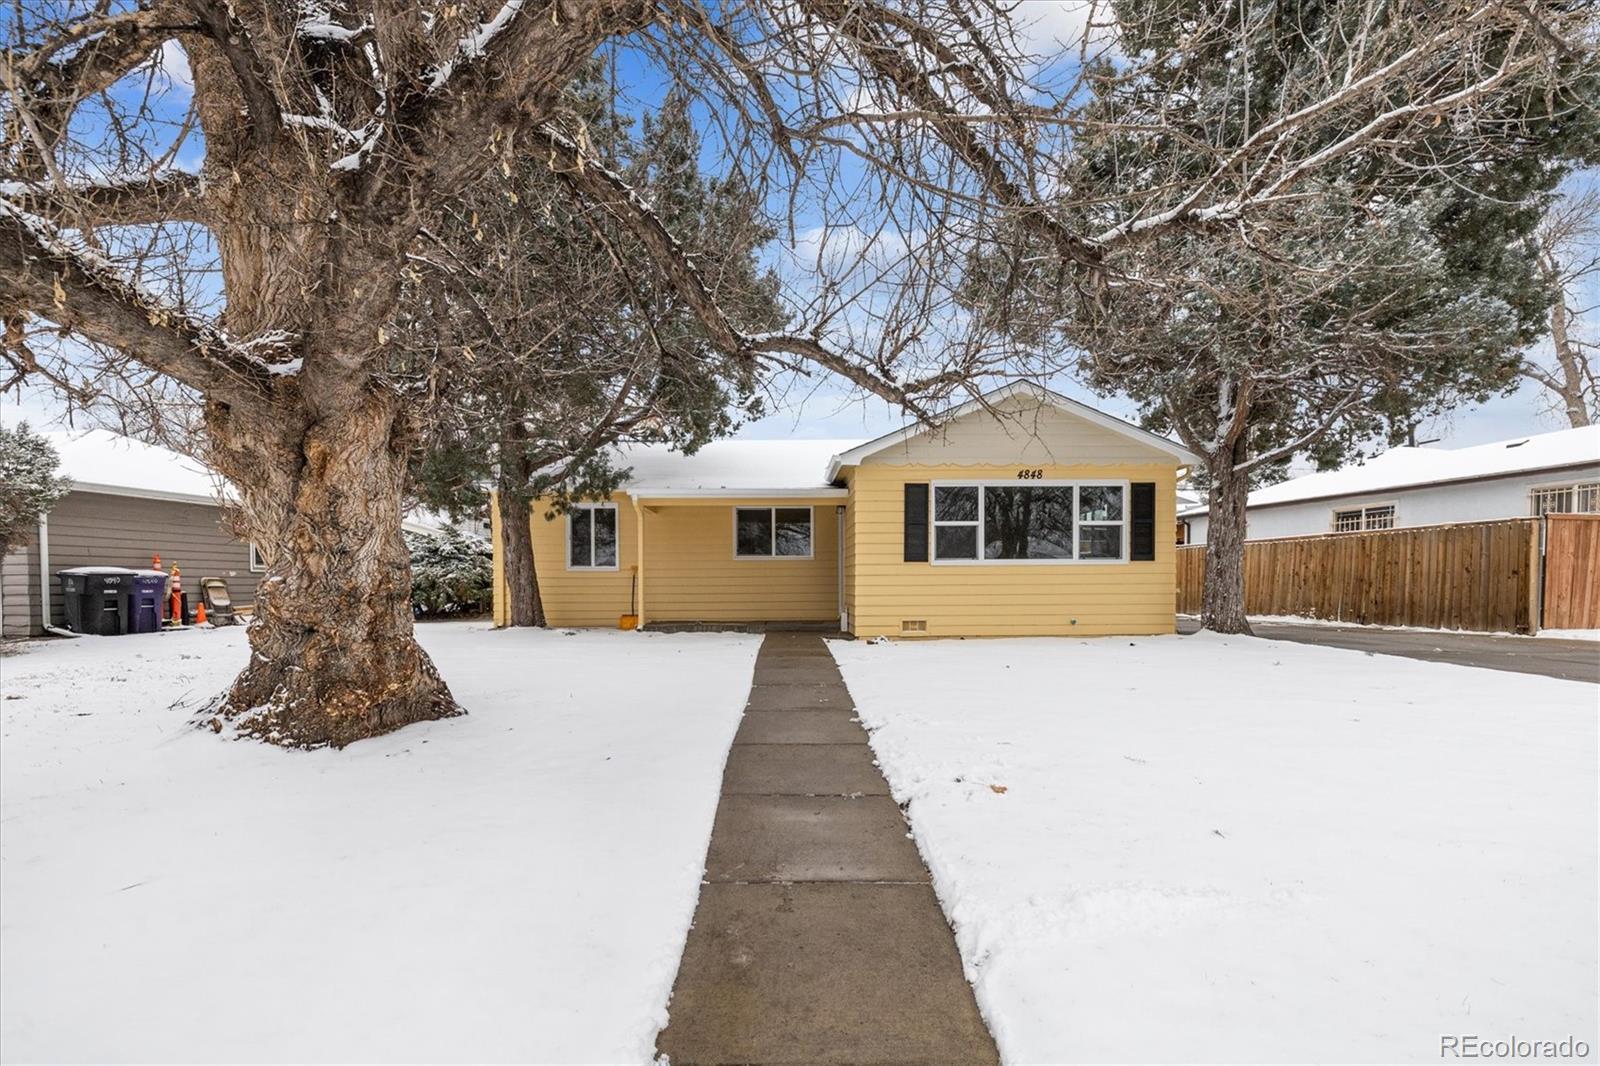 Photo one of 4848 W Gill Pl Denver CO 80219 | MLS 9183583